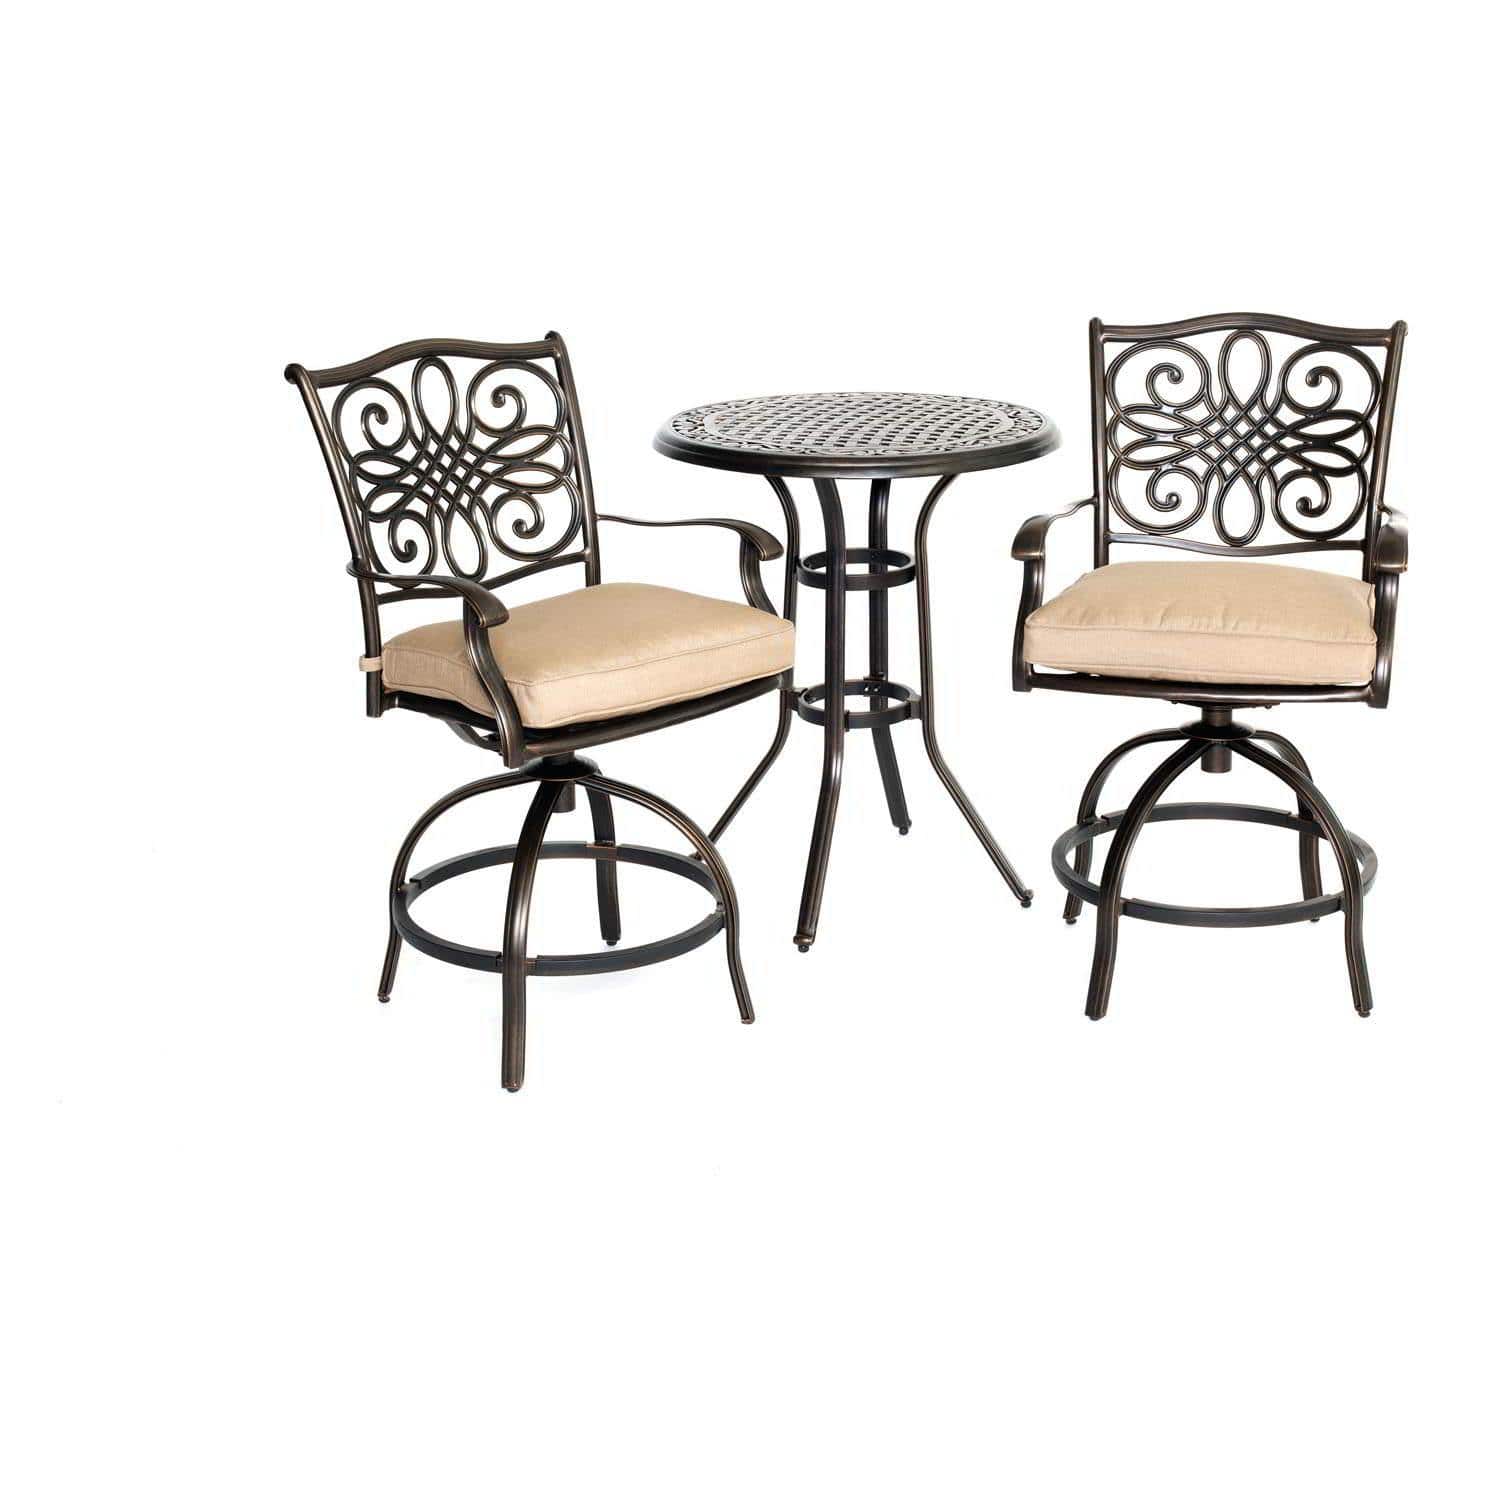 Hanover Bistro Set Hanover - Traditions3pc: 2 Counter Height Swivel Chairs, 30" Round Cast Tbl (36"H) - TRADDN3PCSW-BR